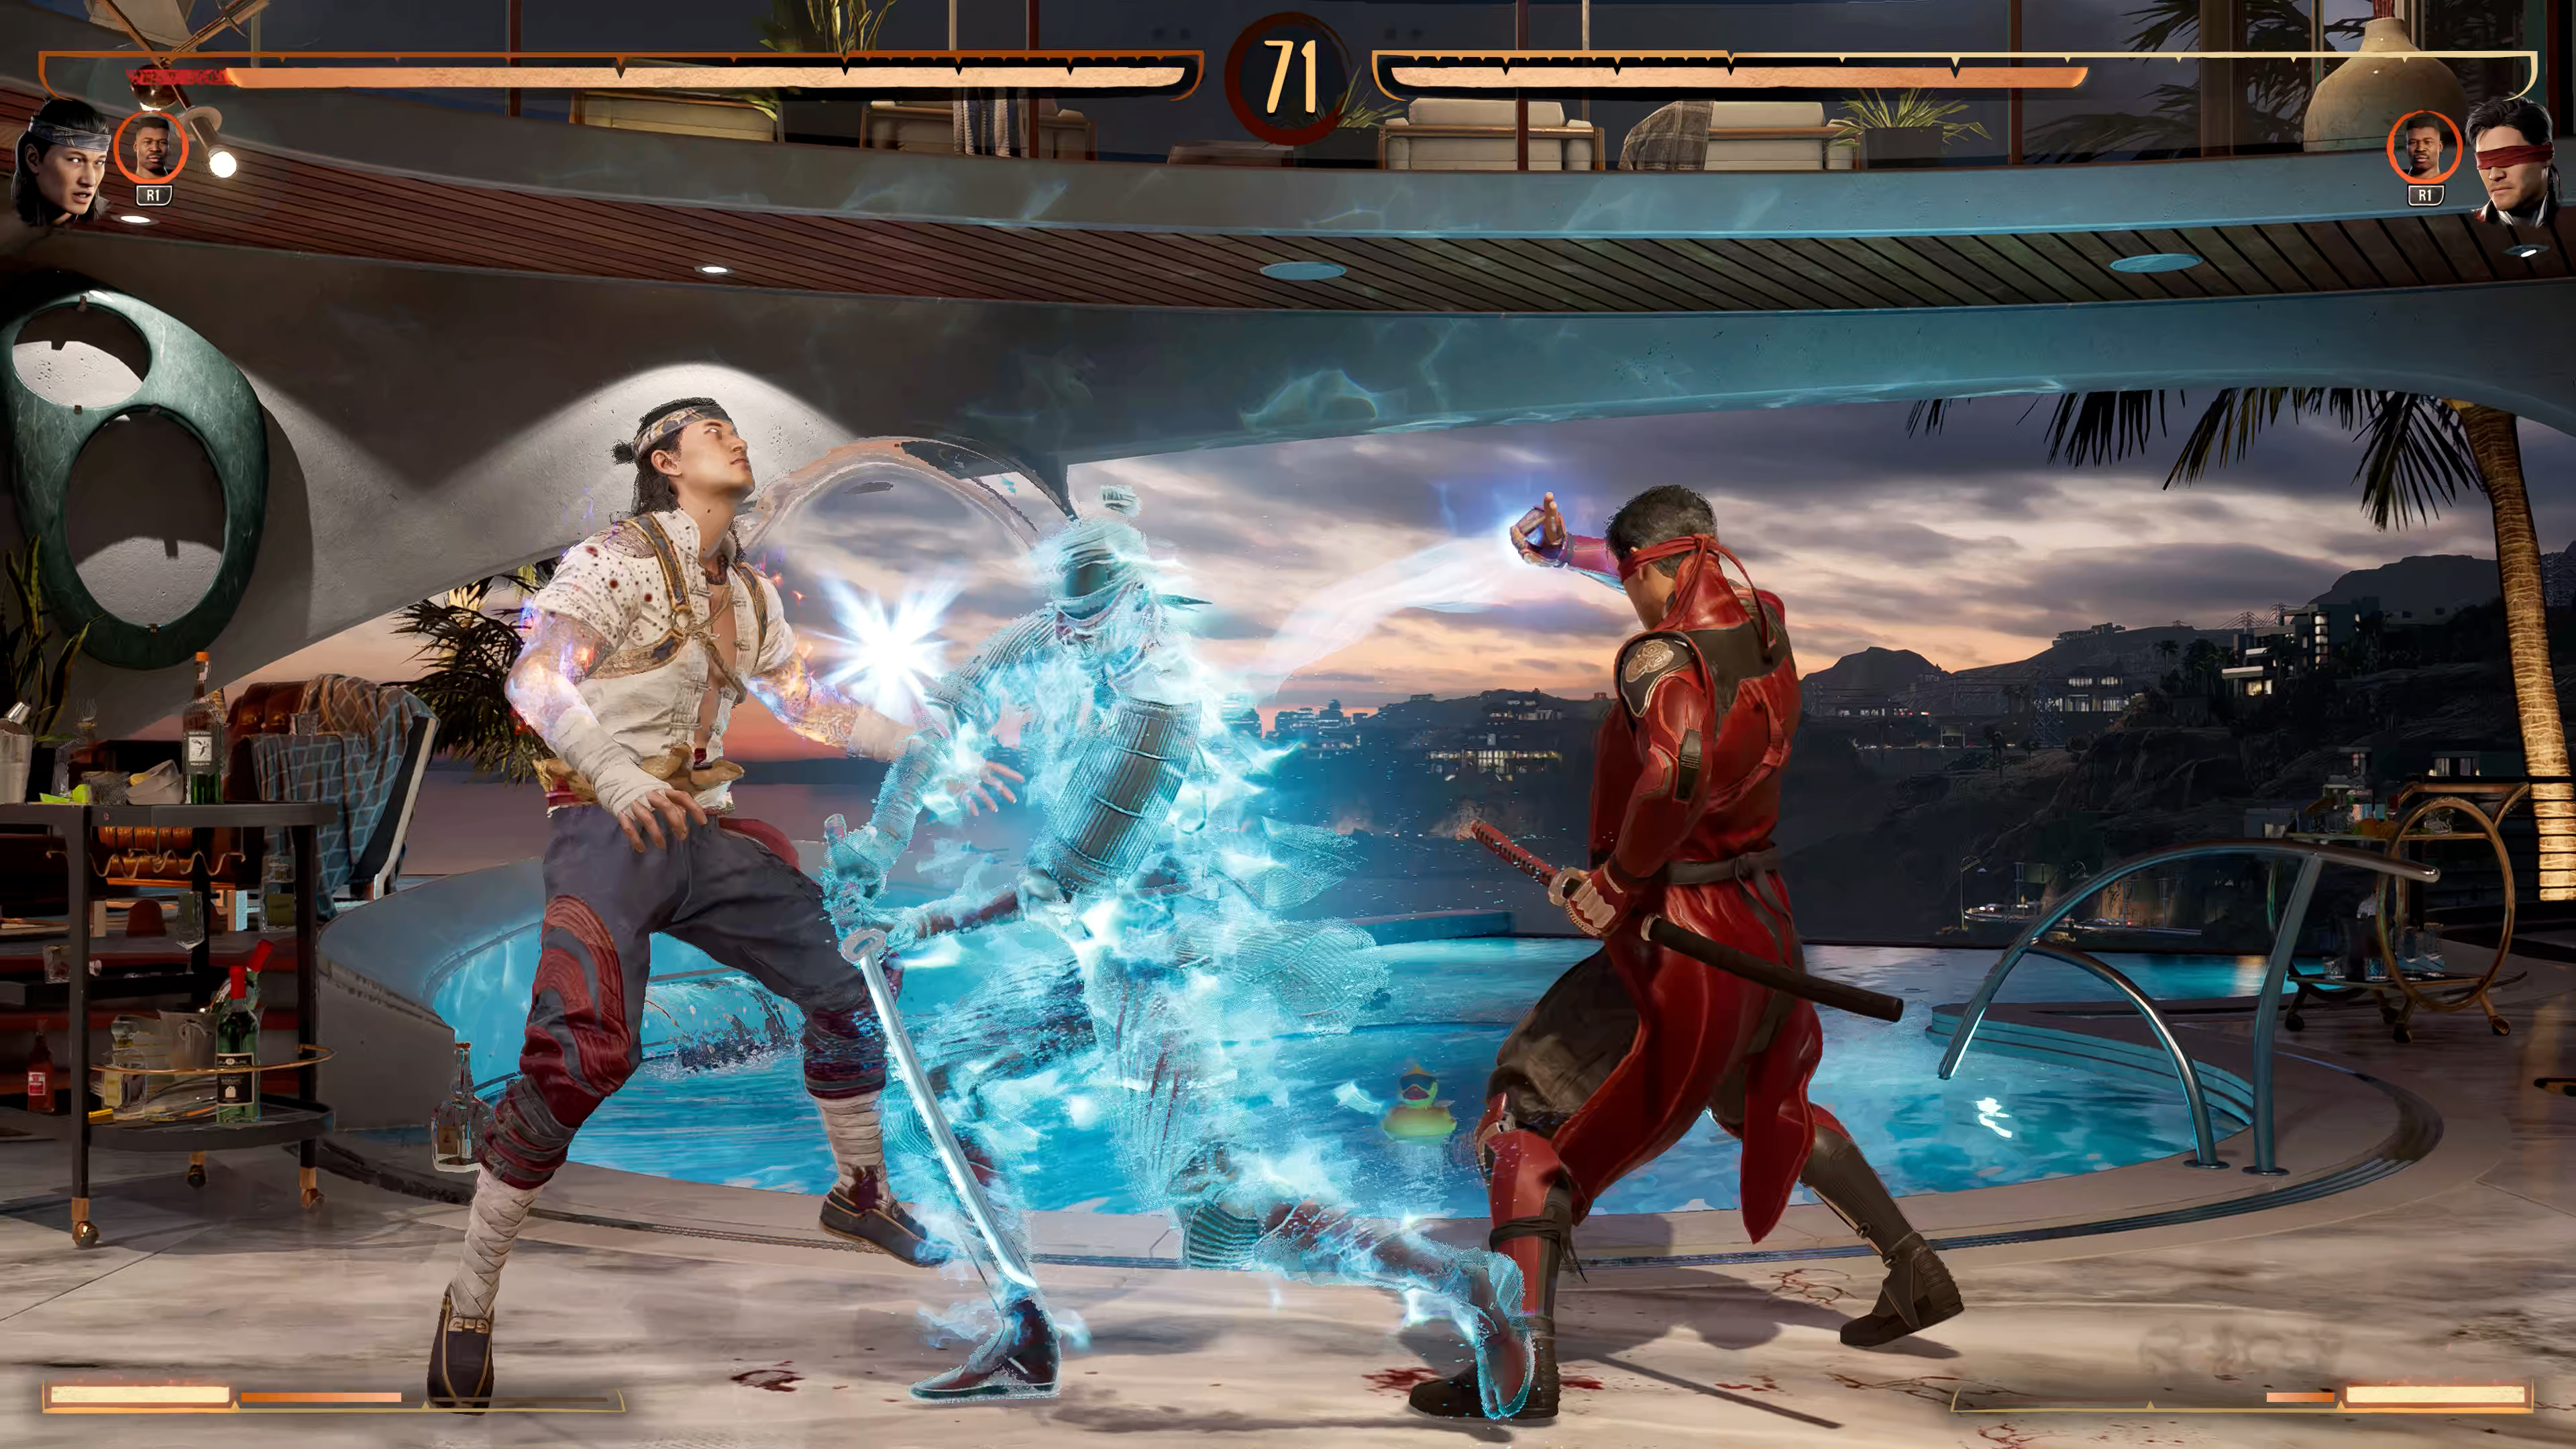 Kenshi attacks Liu Kang in Johnny Cage’s house stage in a screenshot from Mortal Kombat 1